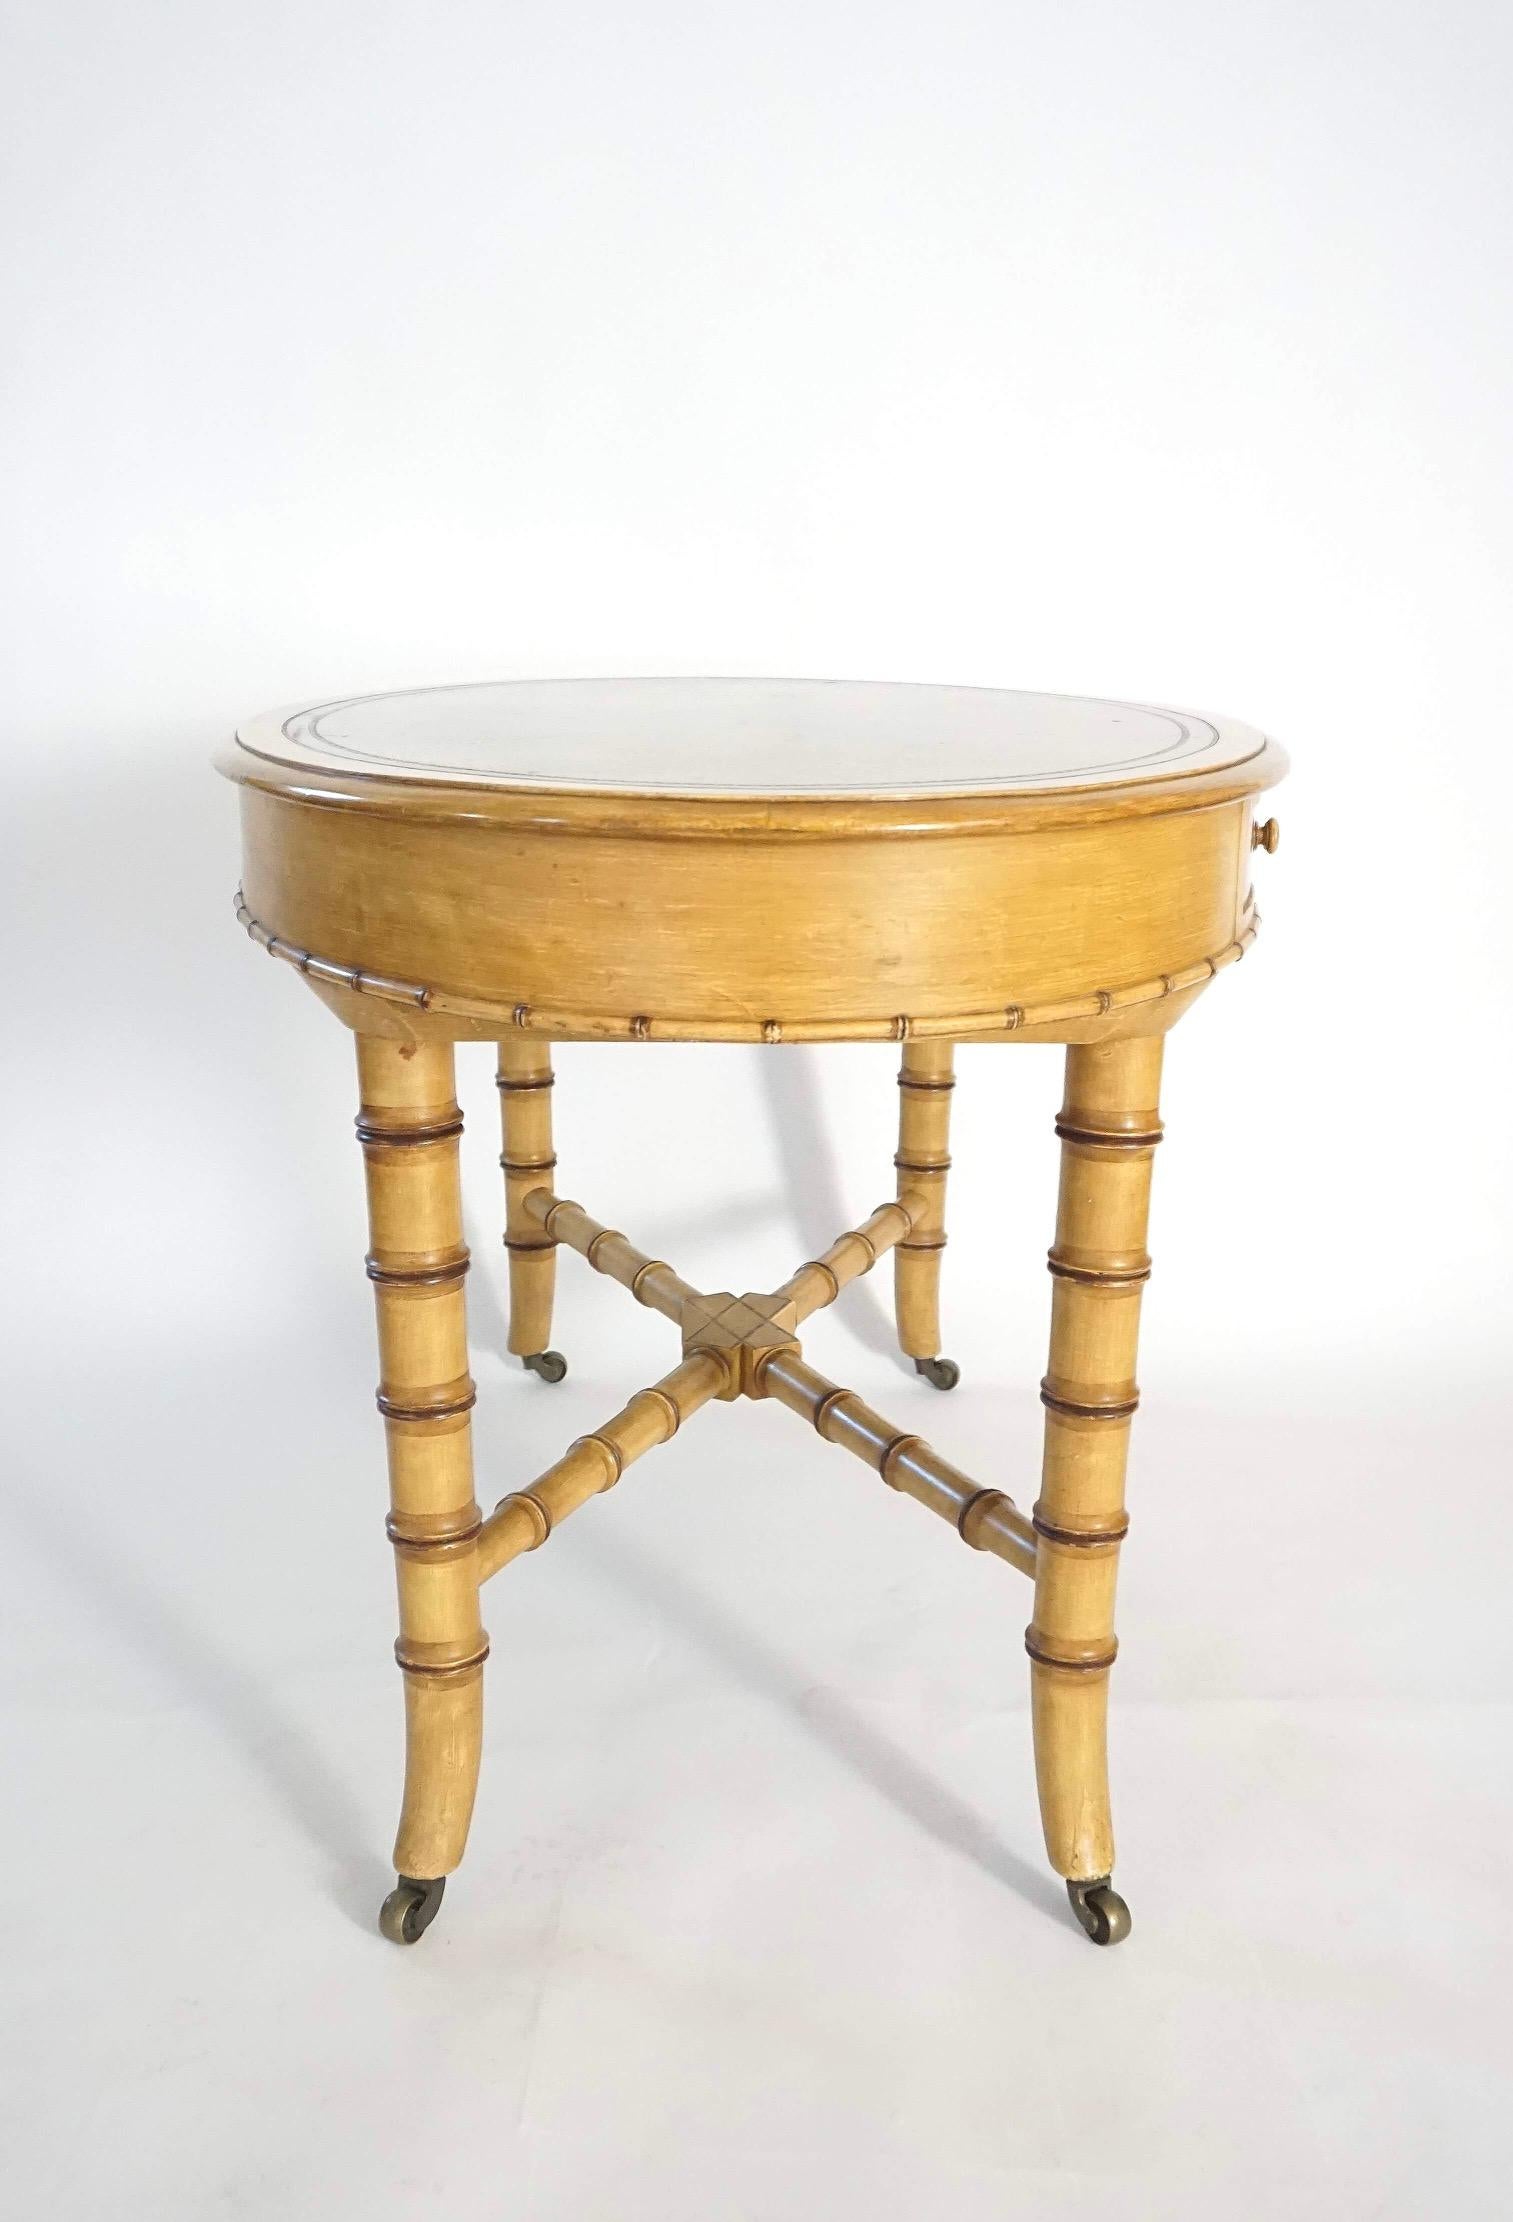 Aesthetic Movement Howard & Sons London Leather Topped Faux Bamboo Writing Table, circa 1875 For Sale